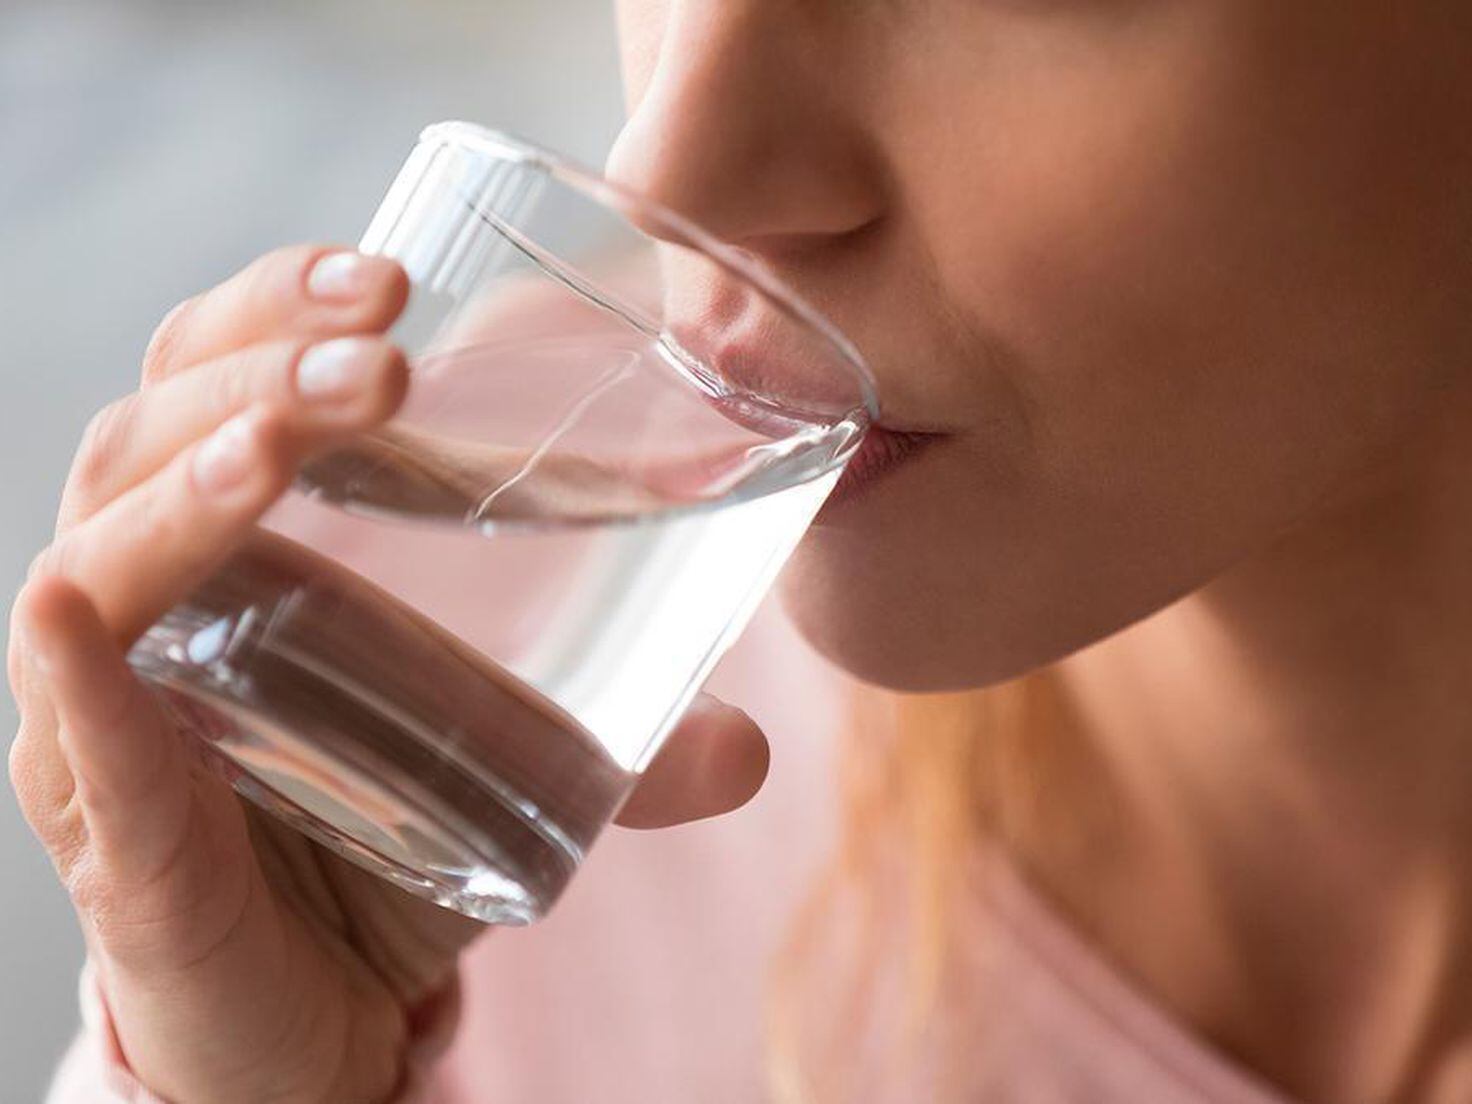 Do You Really Need To Drink Two Litres Of Water A Day? New Study Says No